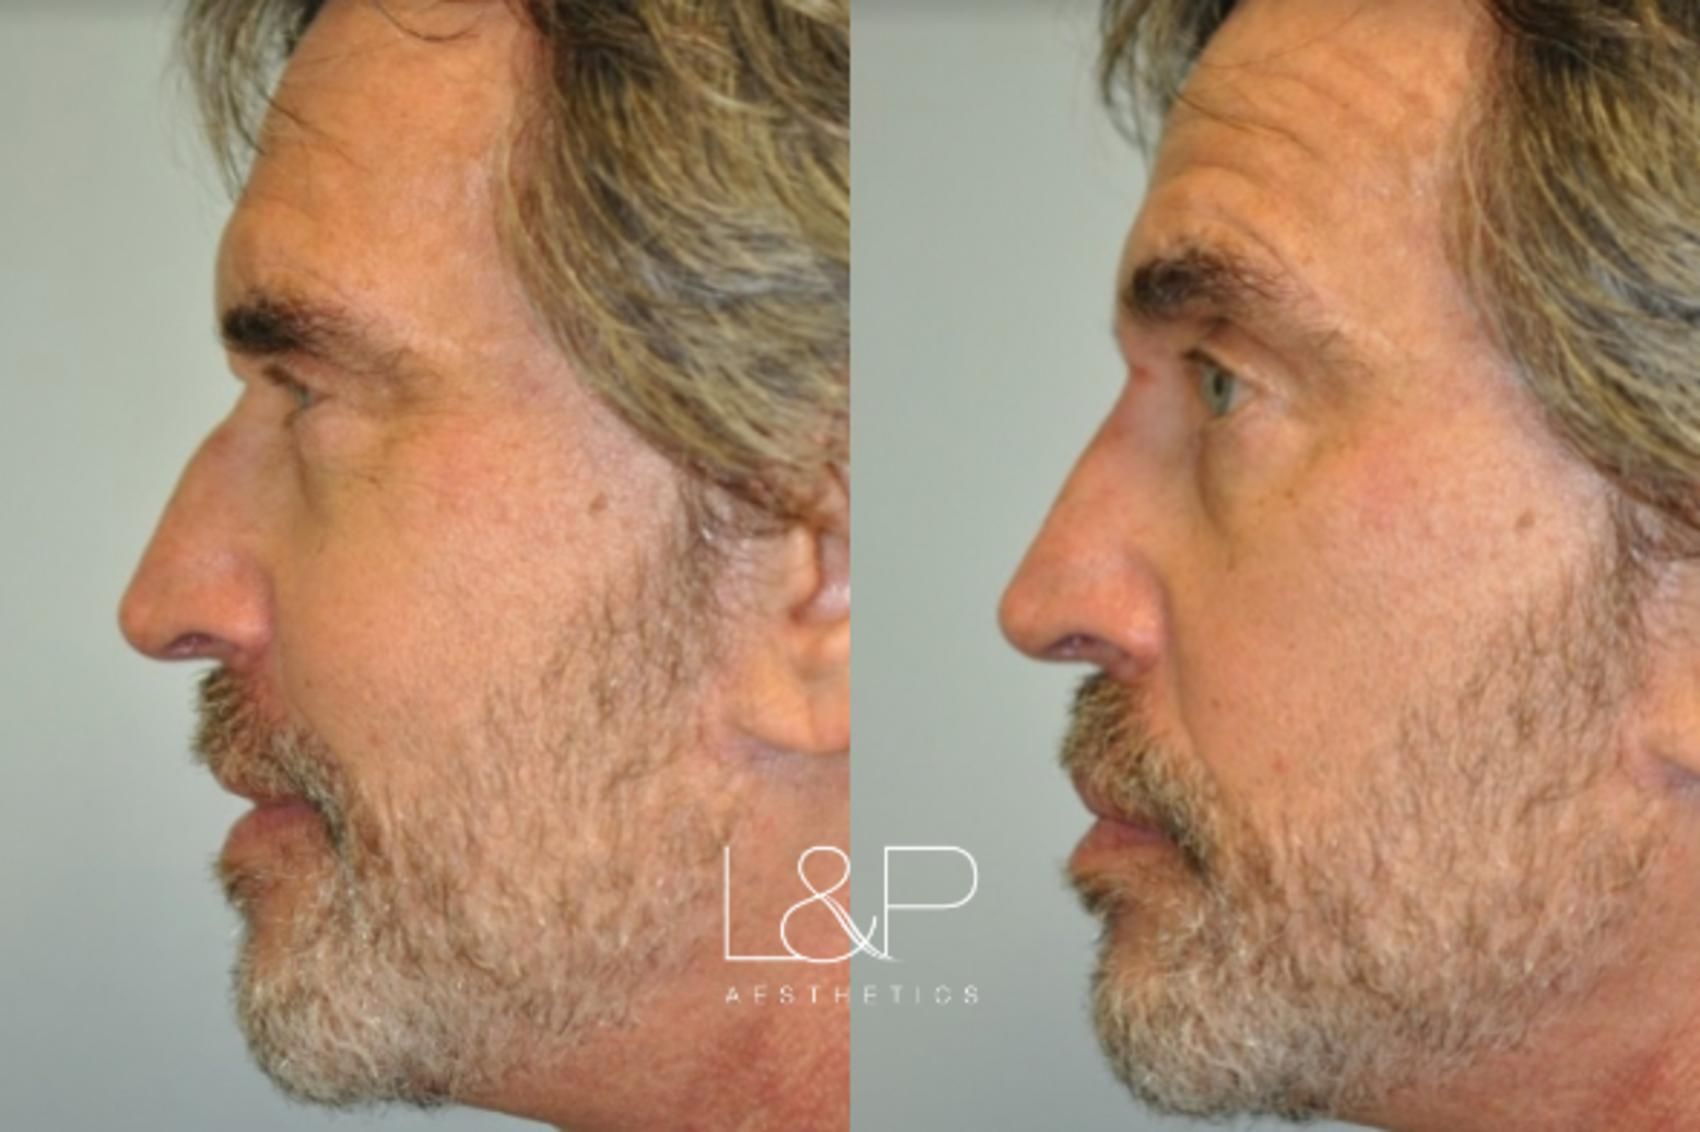 Liquid Rhinoplasty before and after treatment